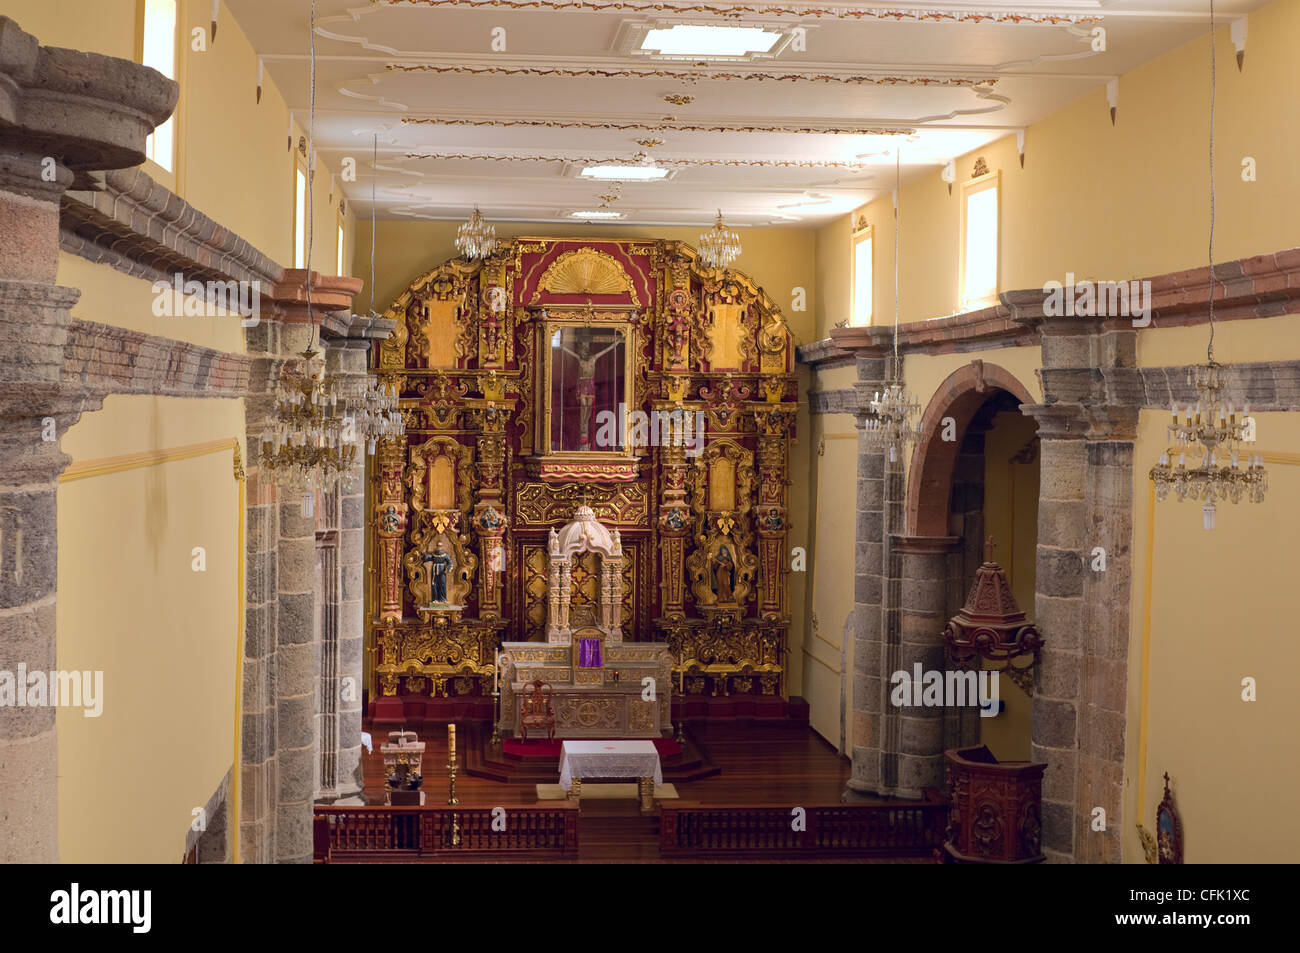 Inside Franciscan monastery church of Amacueca Mexico featuring churrigueresco style adornments of altar and surroundings Stock Photo